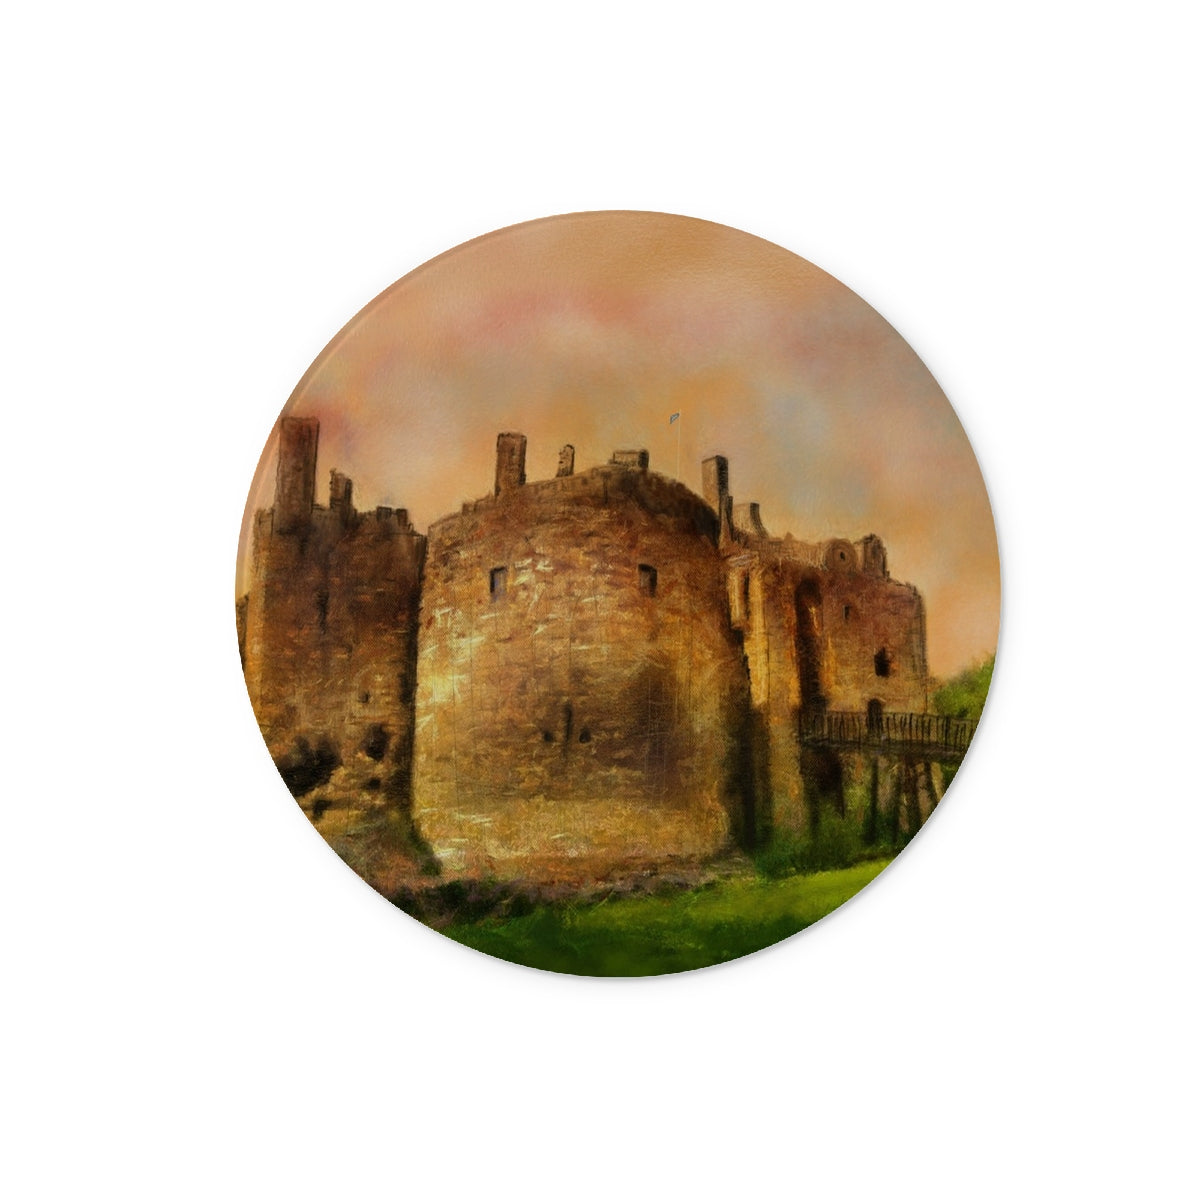 Dirleton Castle Art Gifts Glass Chopping Board-Glass Chopping Boards-Historic & Iconic Scotland Art Gallery-12" Round-Paintings, Prints, Homeware, Art Gifts From Scotland By Scottish Artist Kevin Hunter